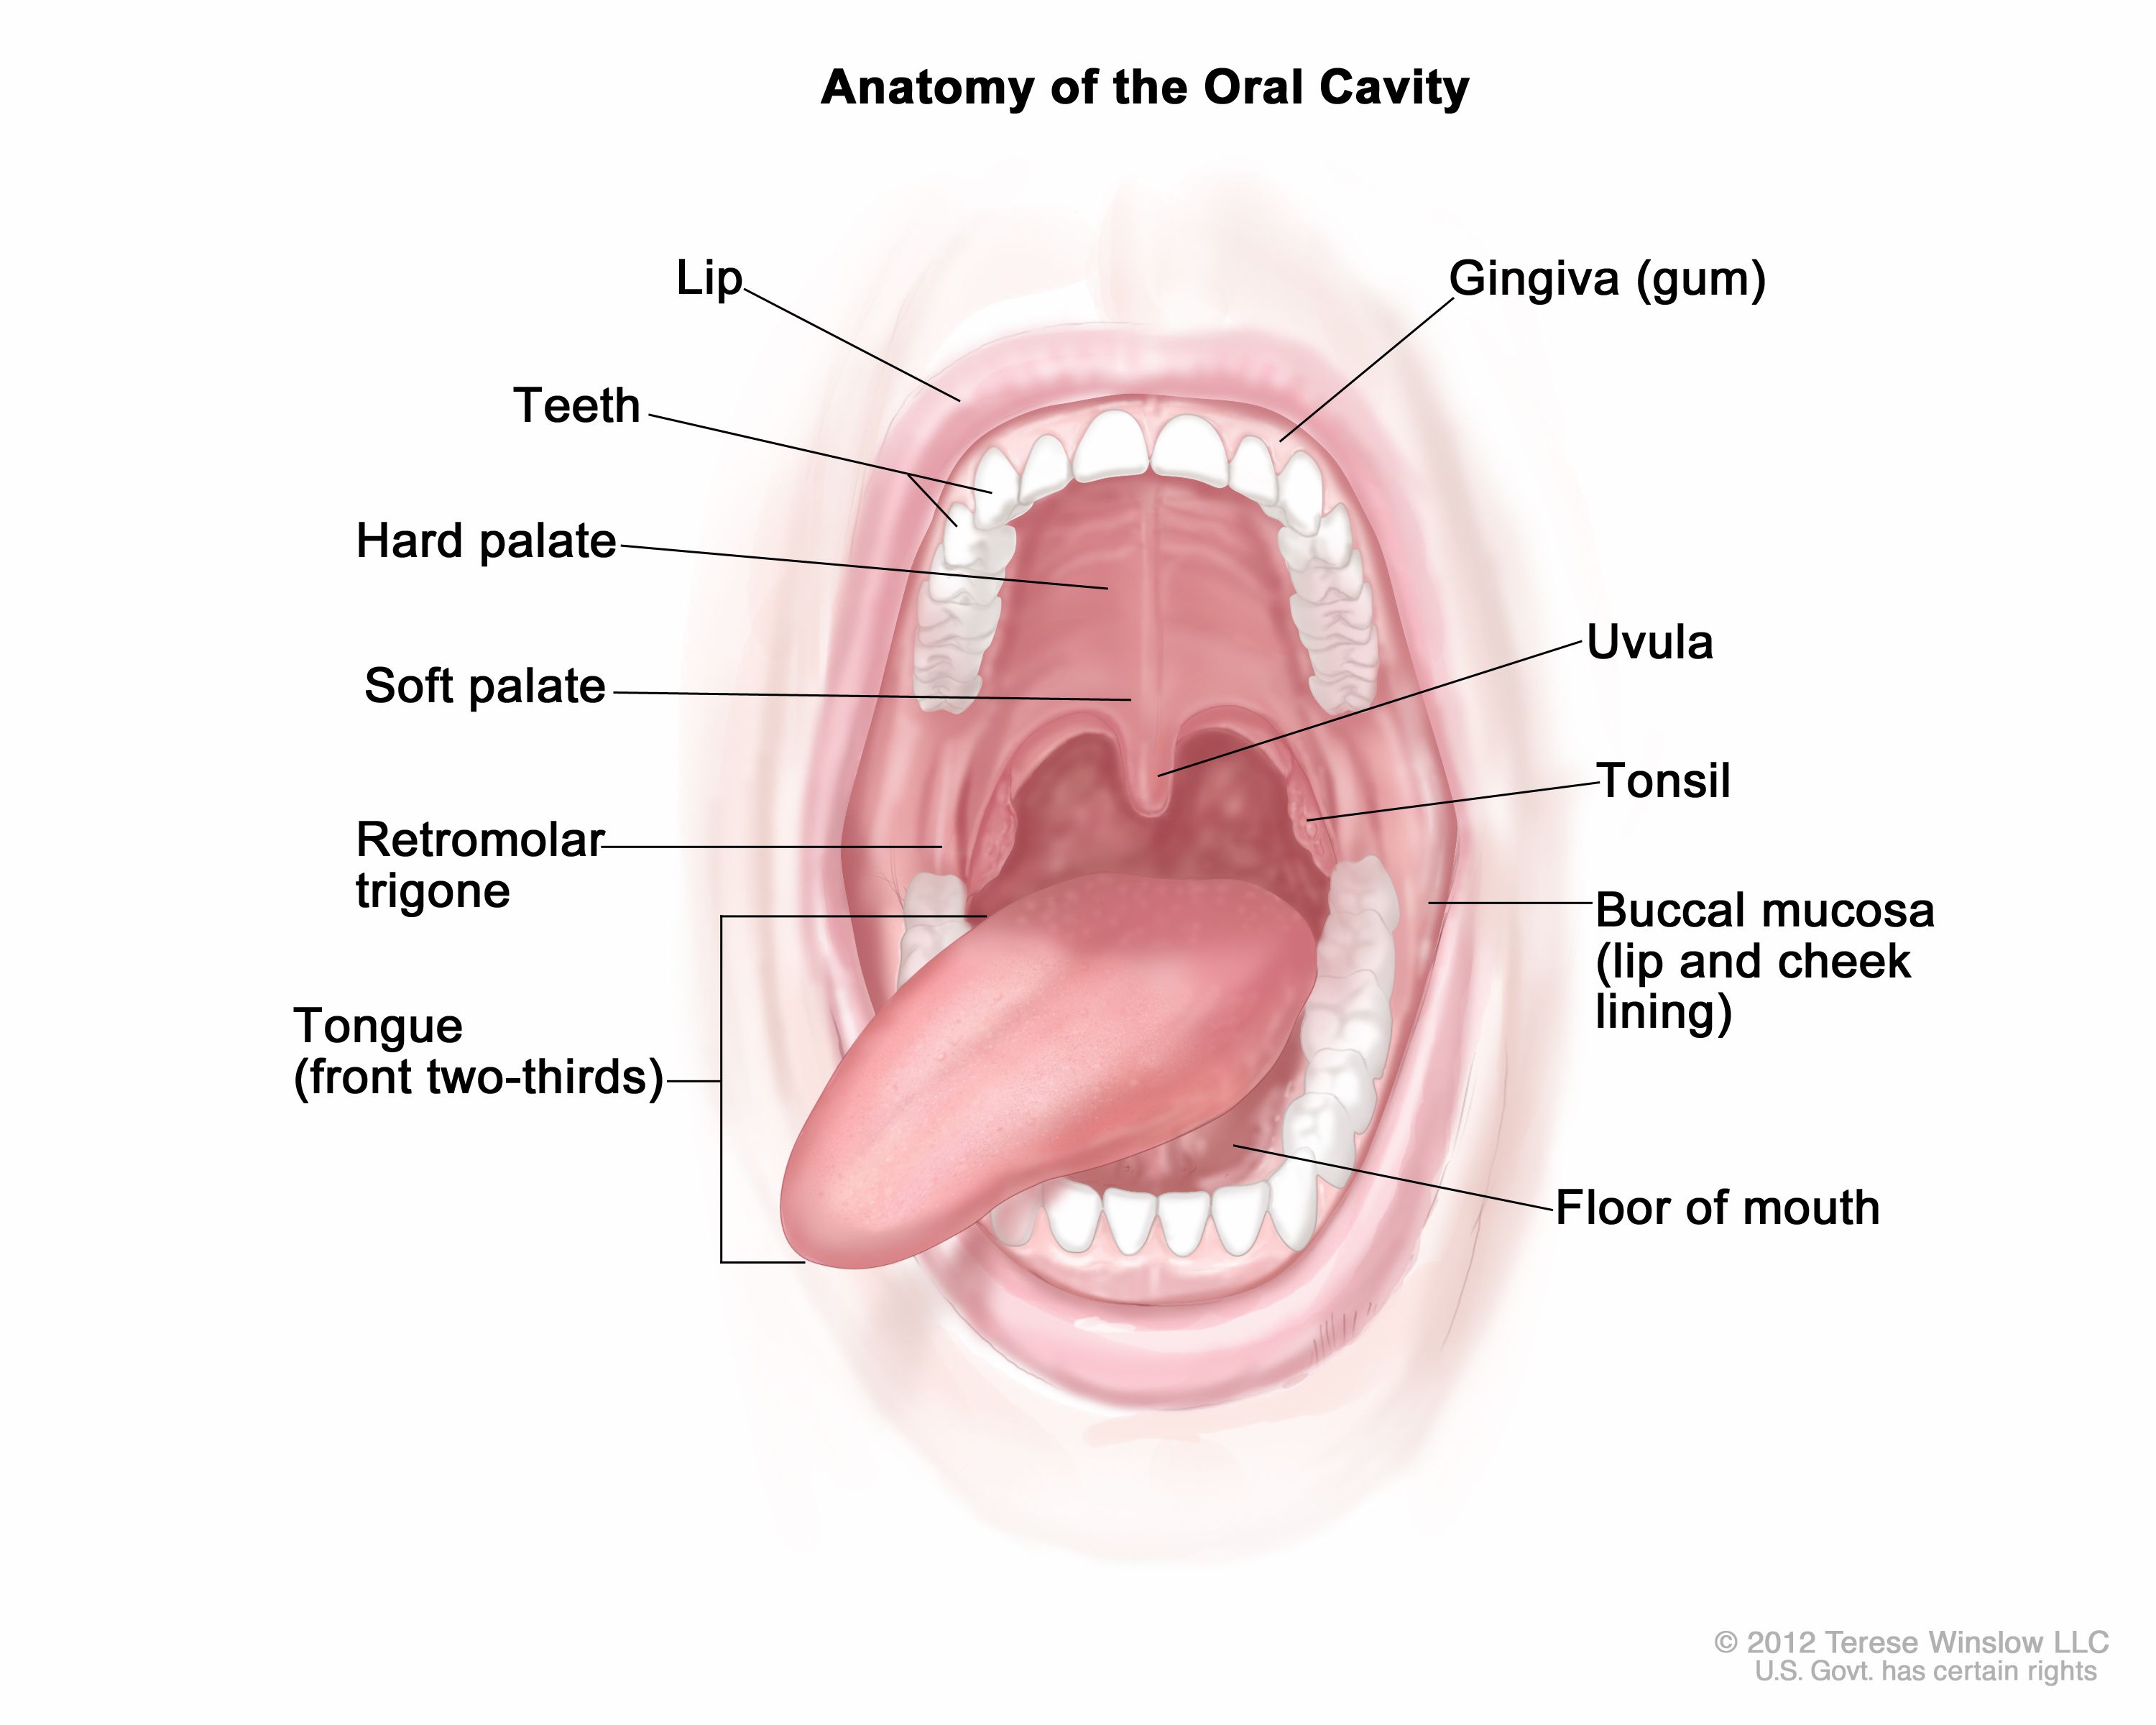 Illustration of oral cavity including lips, palate, teeth, Tonsils, etc.